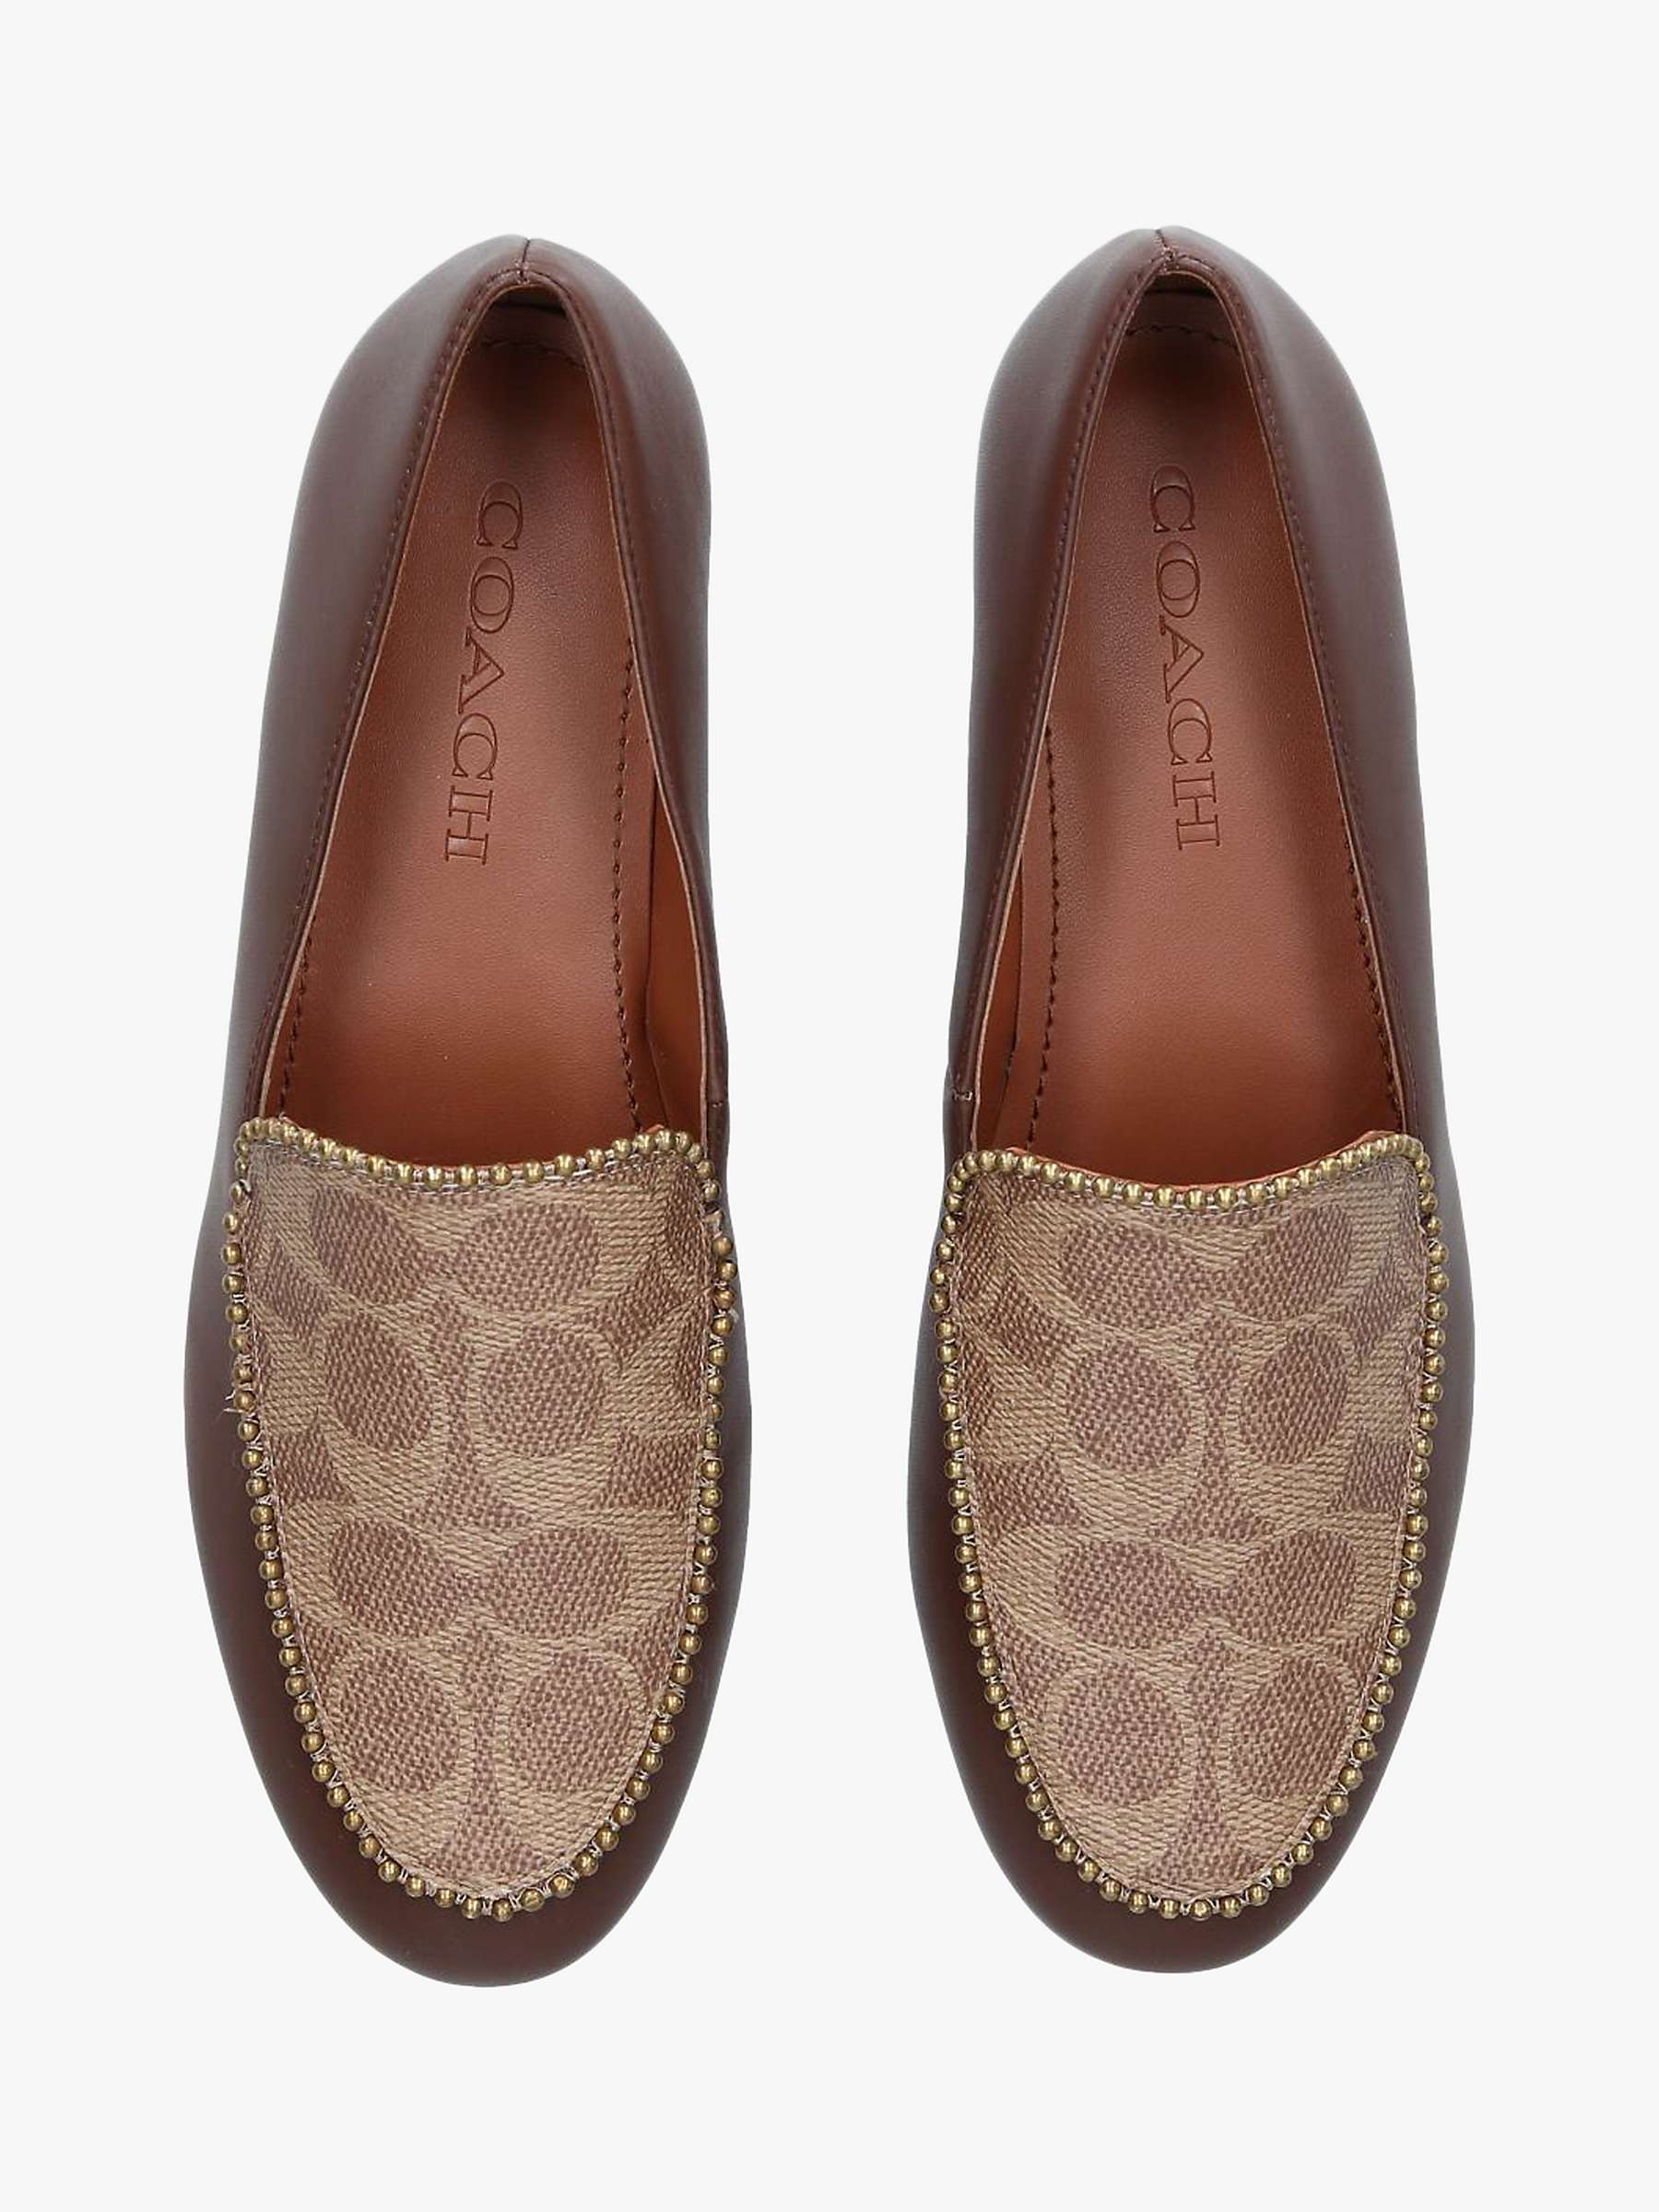 Buy Coach Harper Signature Loafers, Multi Brown Online at johnlewis.com